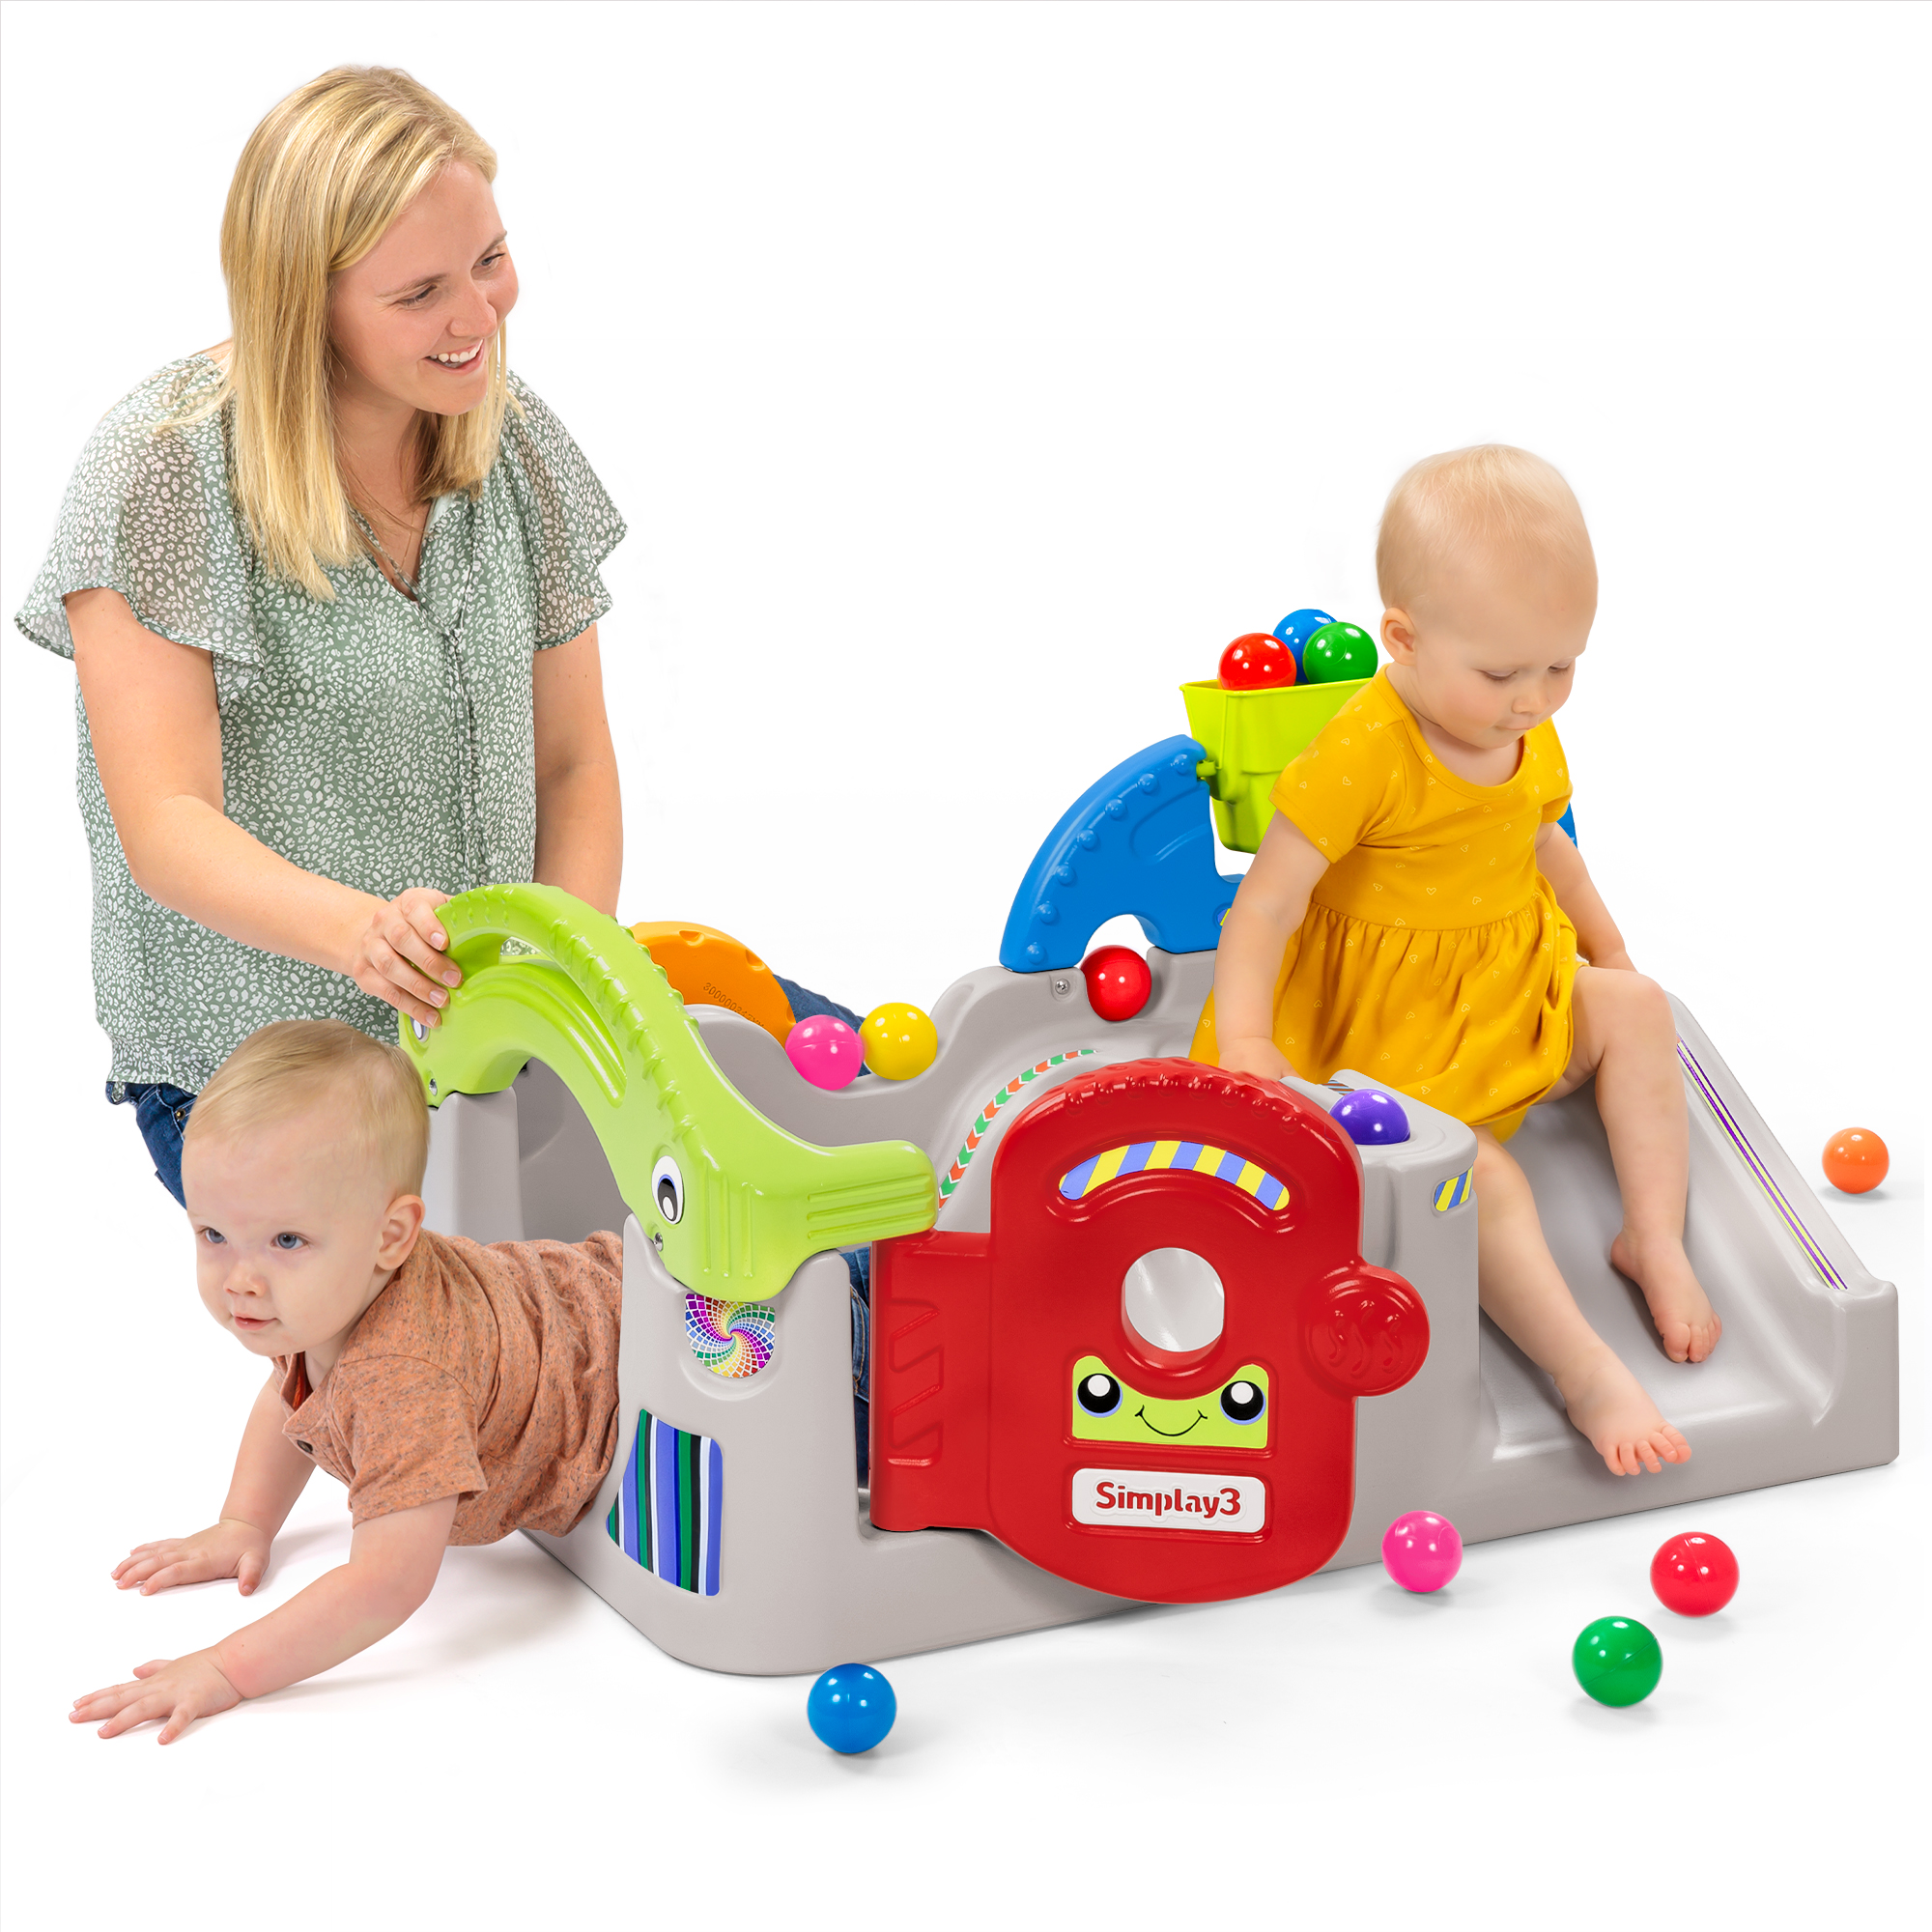 have a ball activity center for babies and toddlers play gym by simplay3